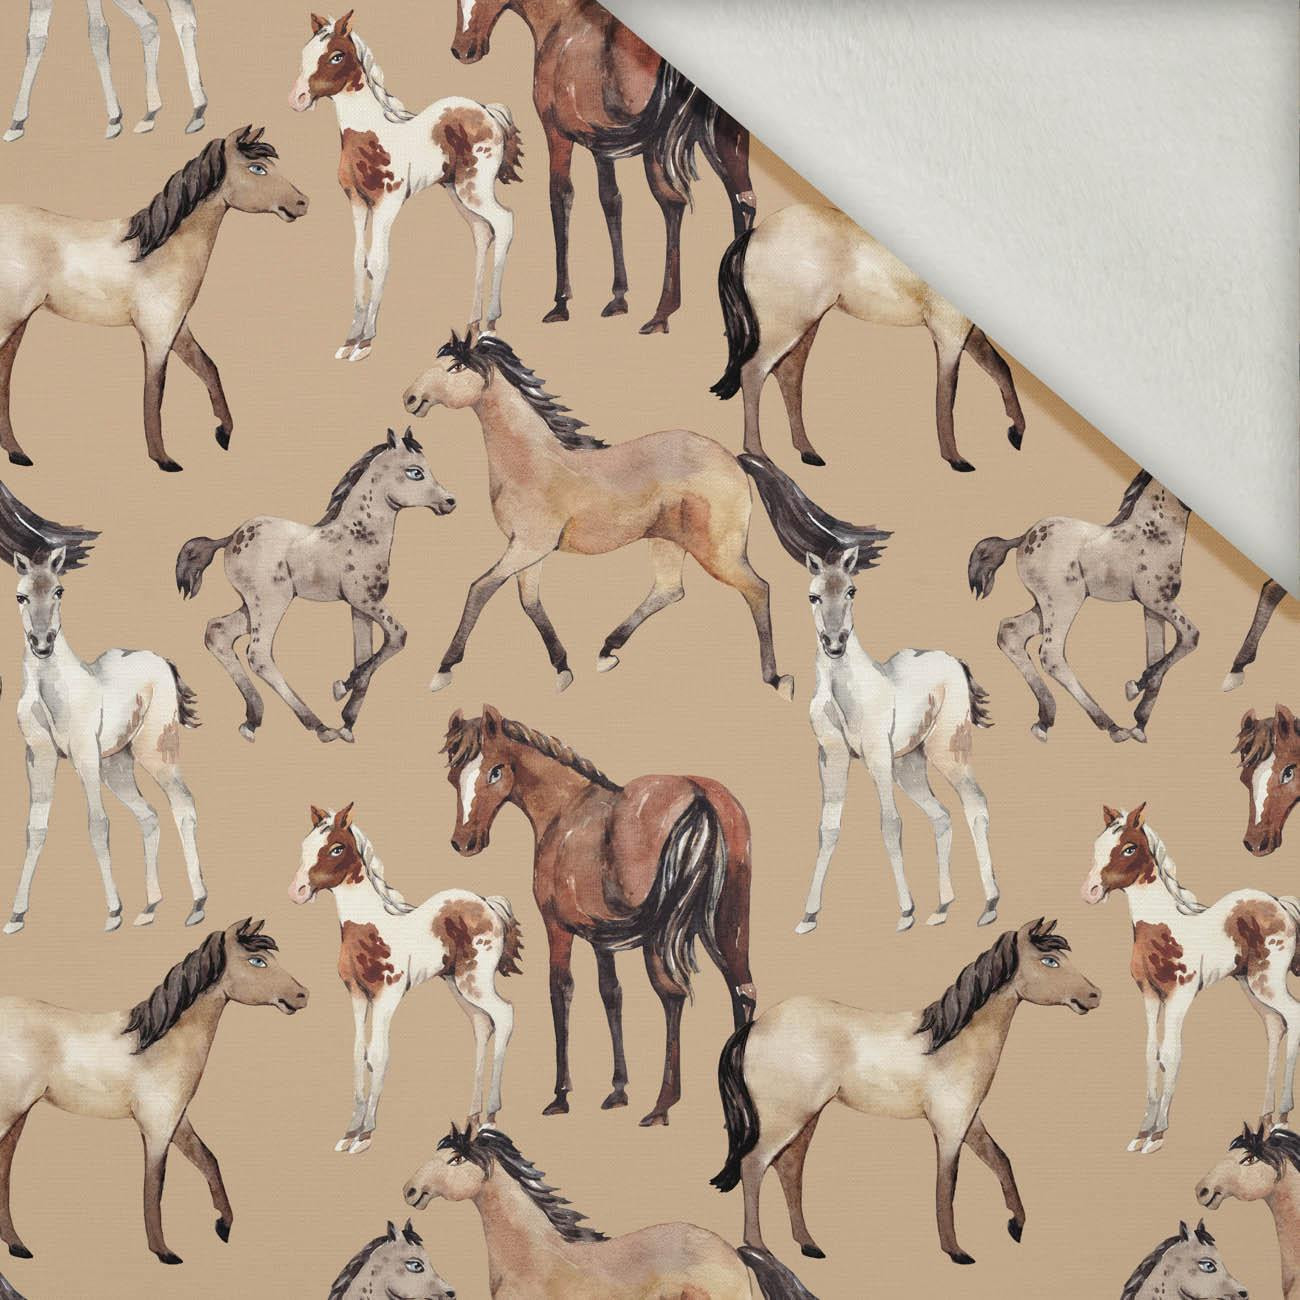 HORSES / beige - brushed knit fabric with teddy / alpine fleece